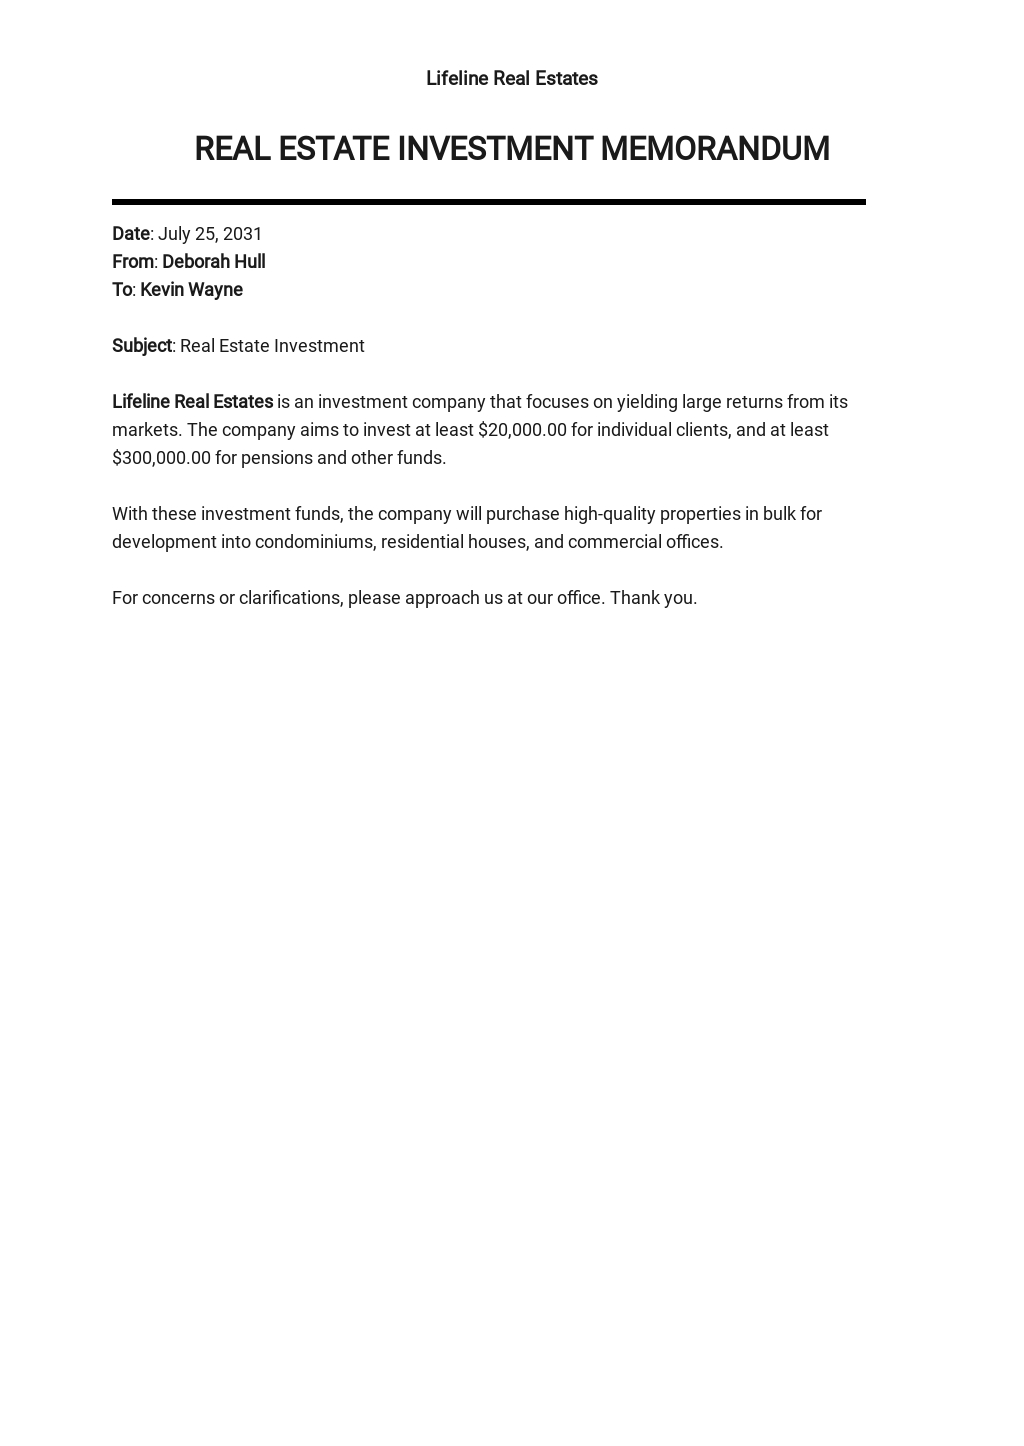 Private Equity Investment Memo Template [Free PDF ...